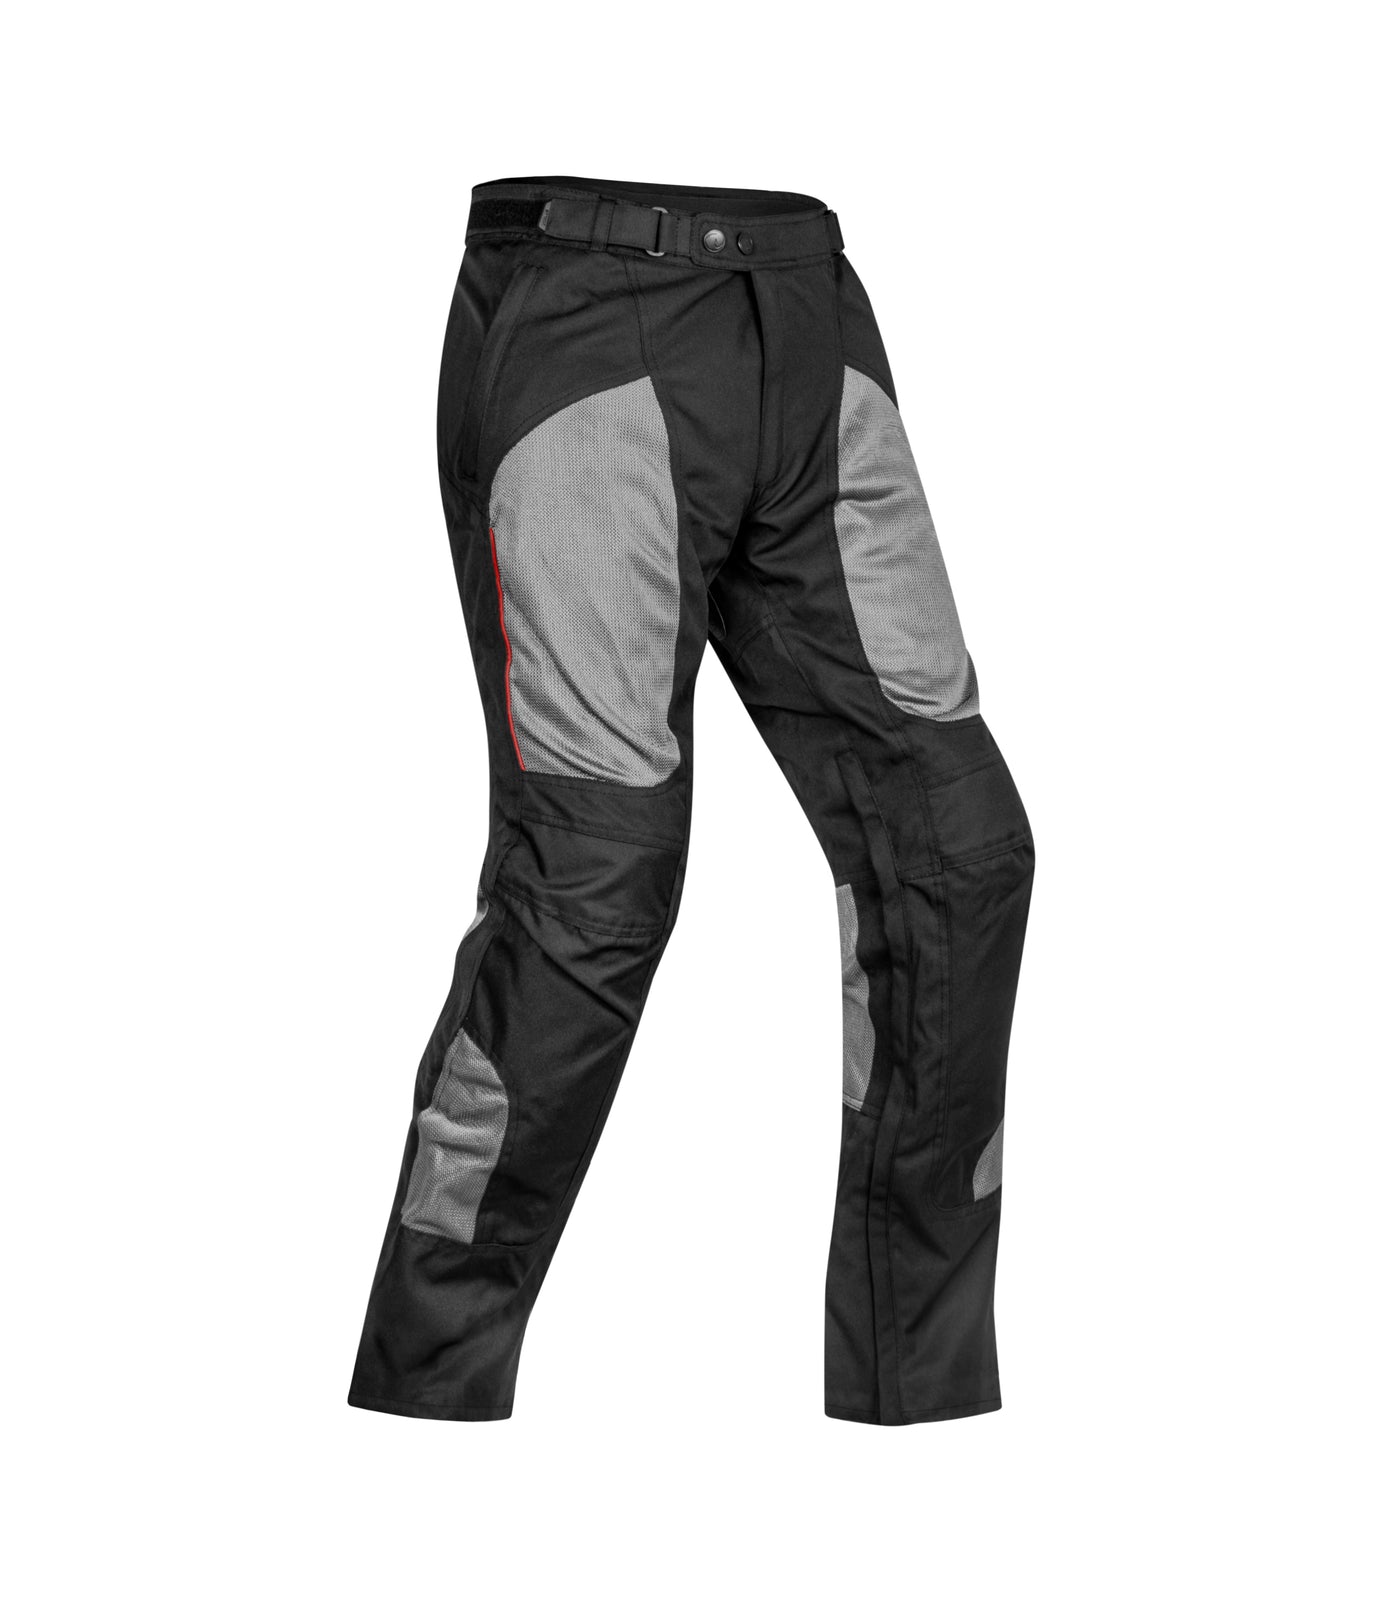 Shopants Motorcycle Trousers Protective Trousers Men S Motorcycle Jeans  Denim Trousers Biker Jeans With 2 Pairs Of Hip And Knee Protection  Removable P  Fruugo IN